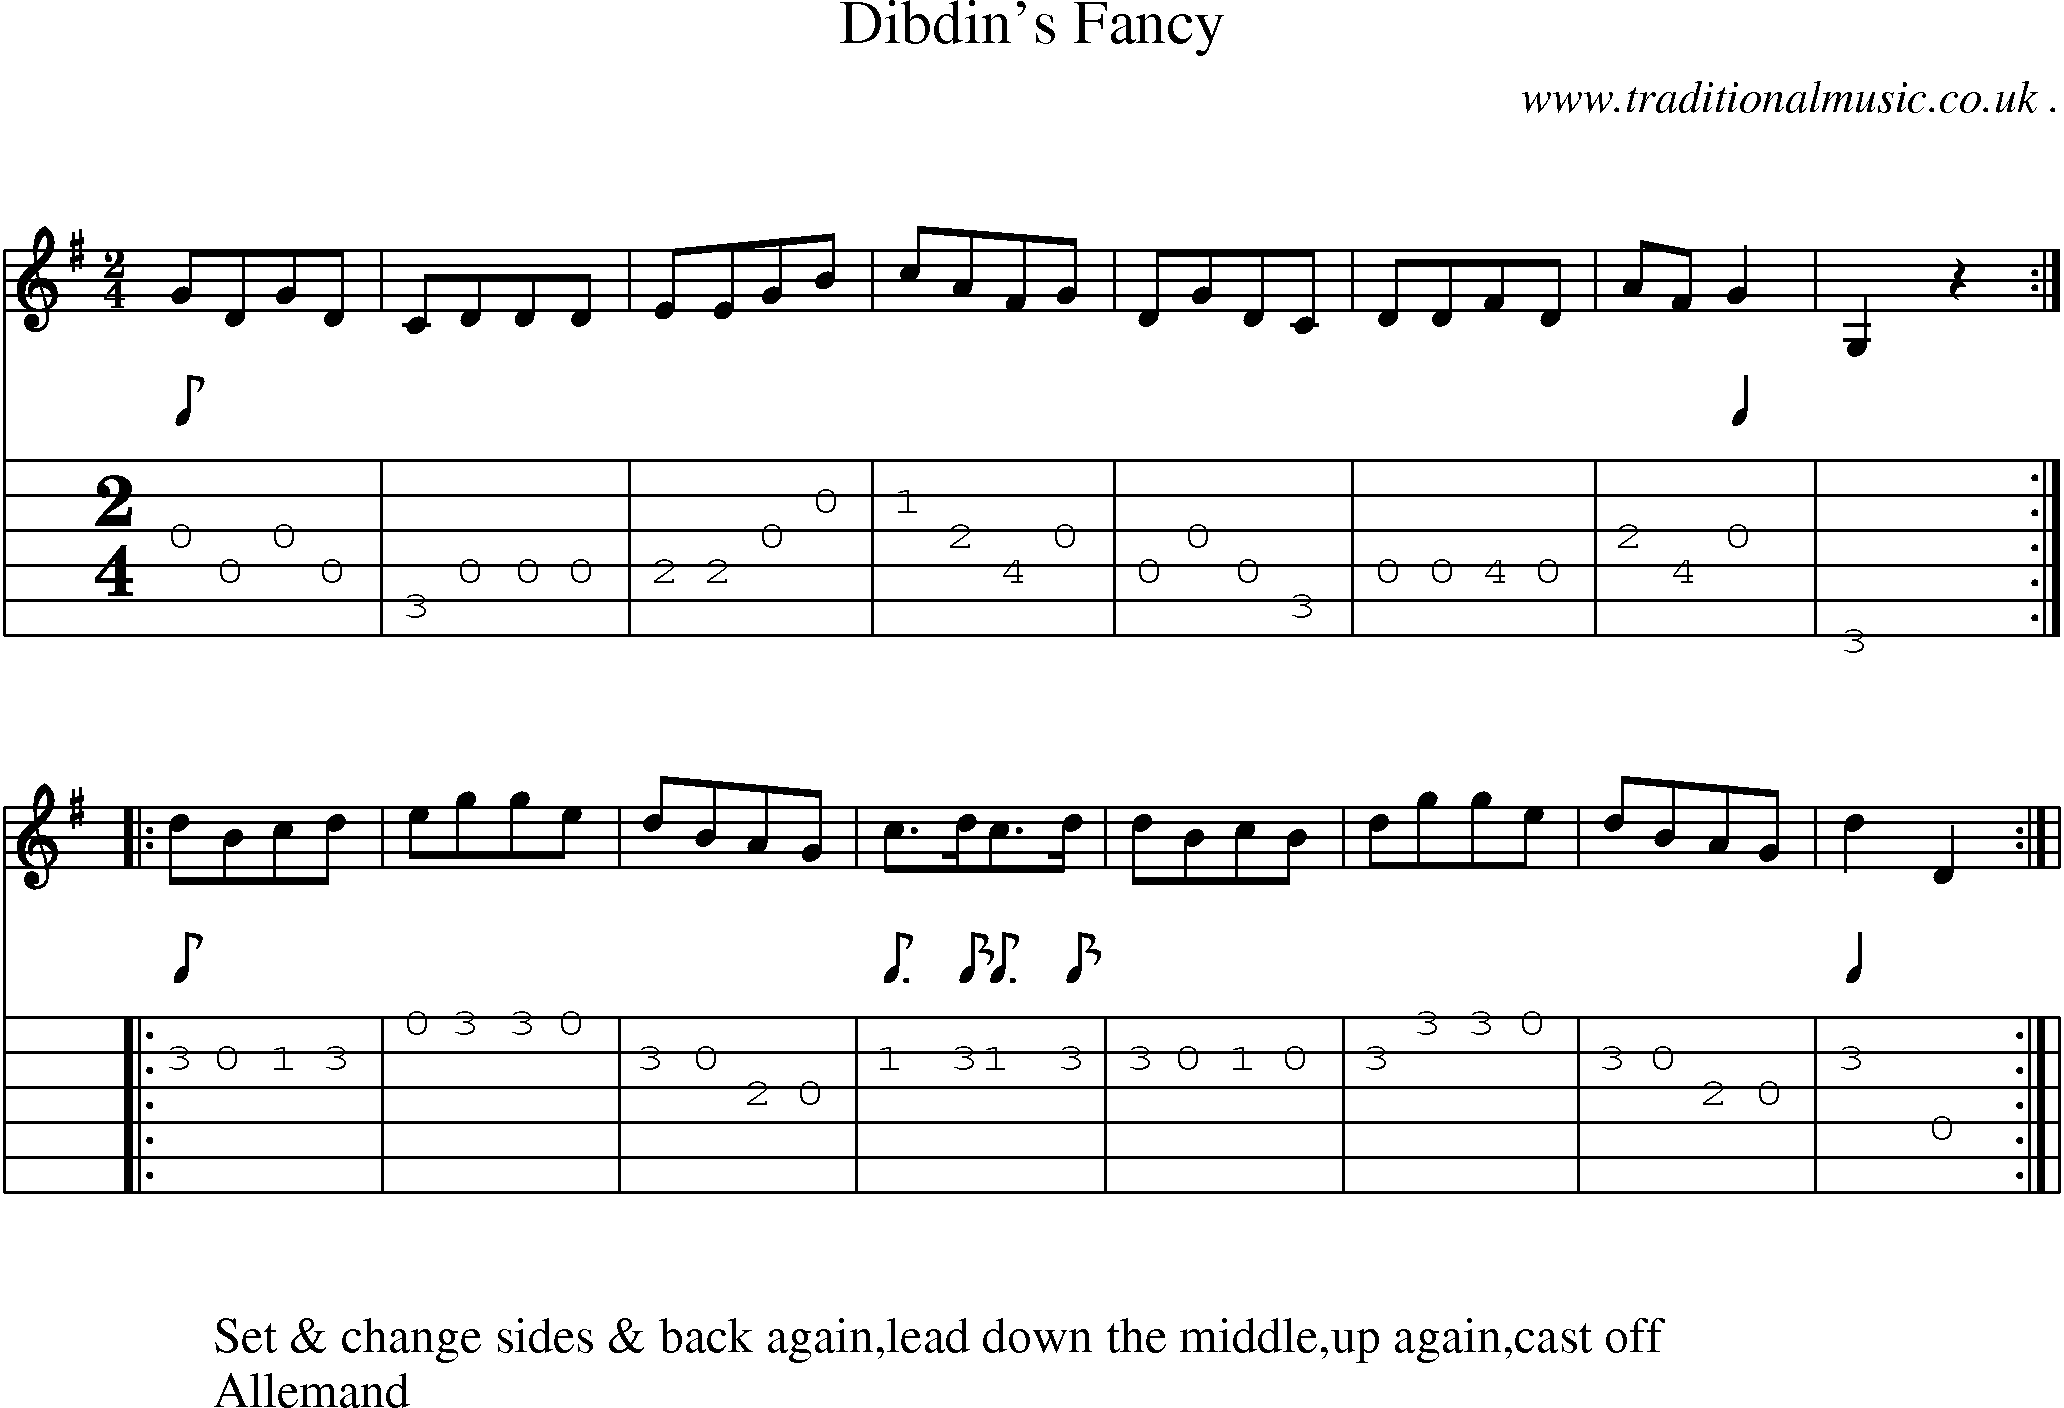 Sheet-Music and Guitar Tabs for Dibdins Fancy